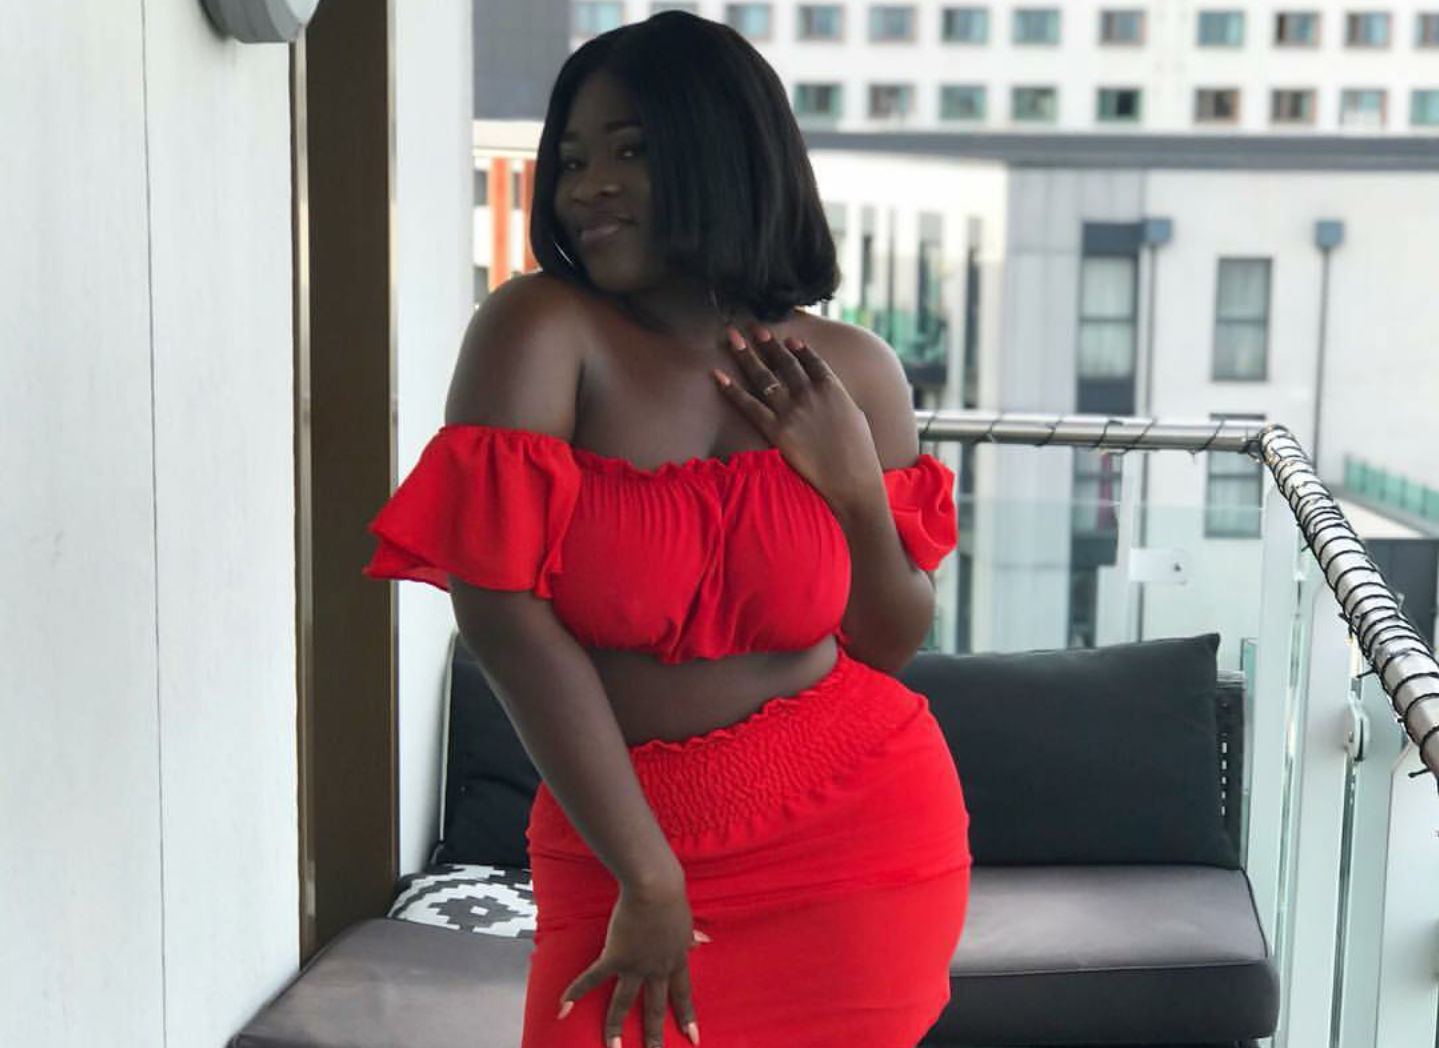 Sista Afia serving melanin mixed with sexiness